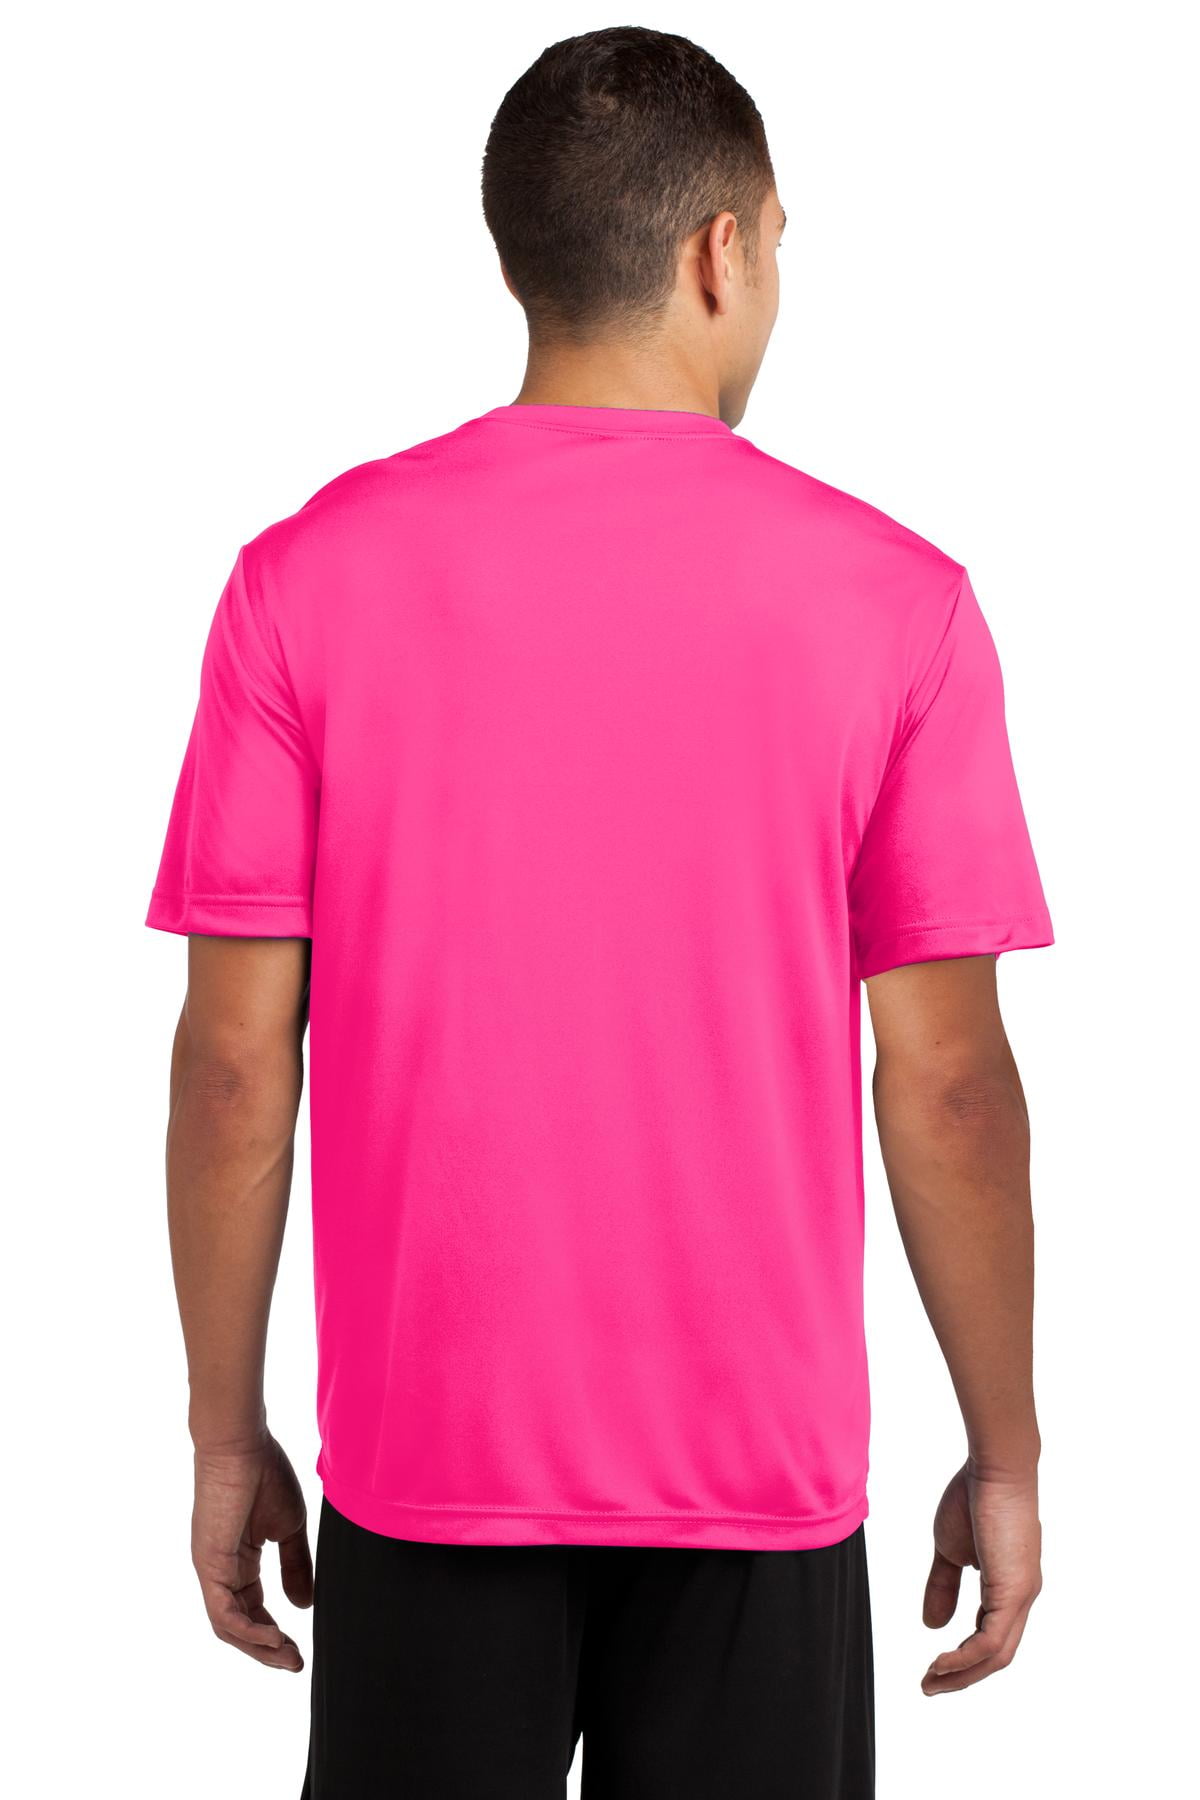 Competitor L Tee Posicharge Neon St350 - Sport-Tek - Pink